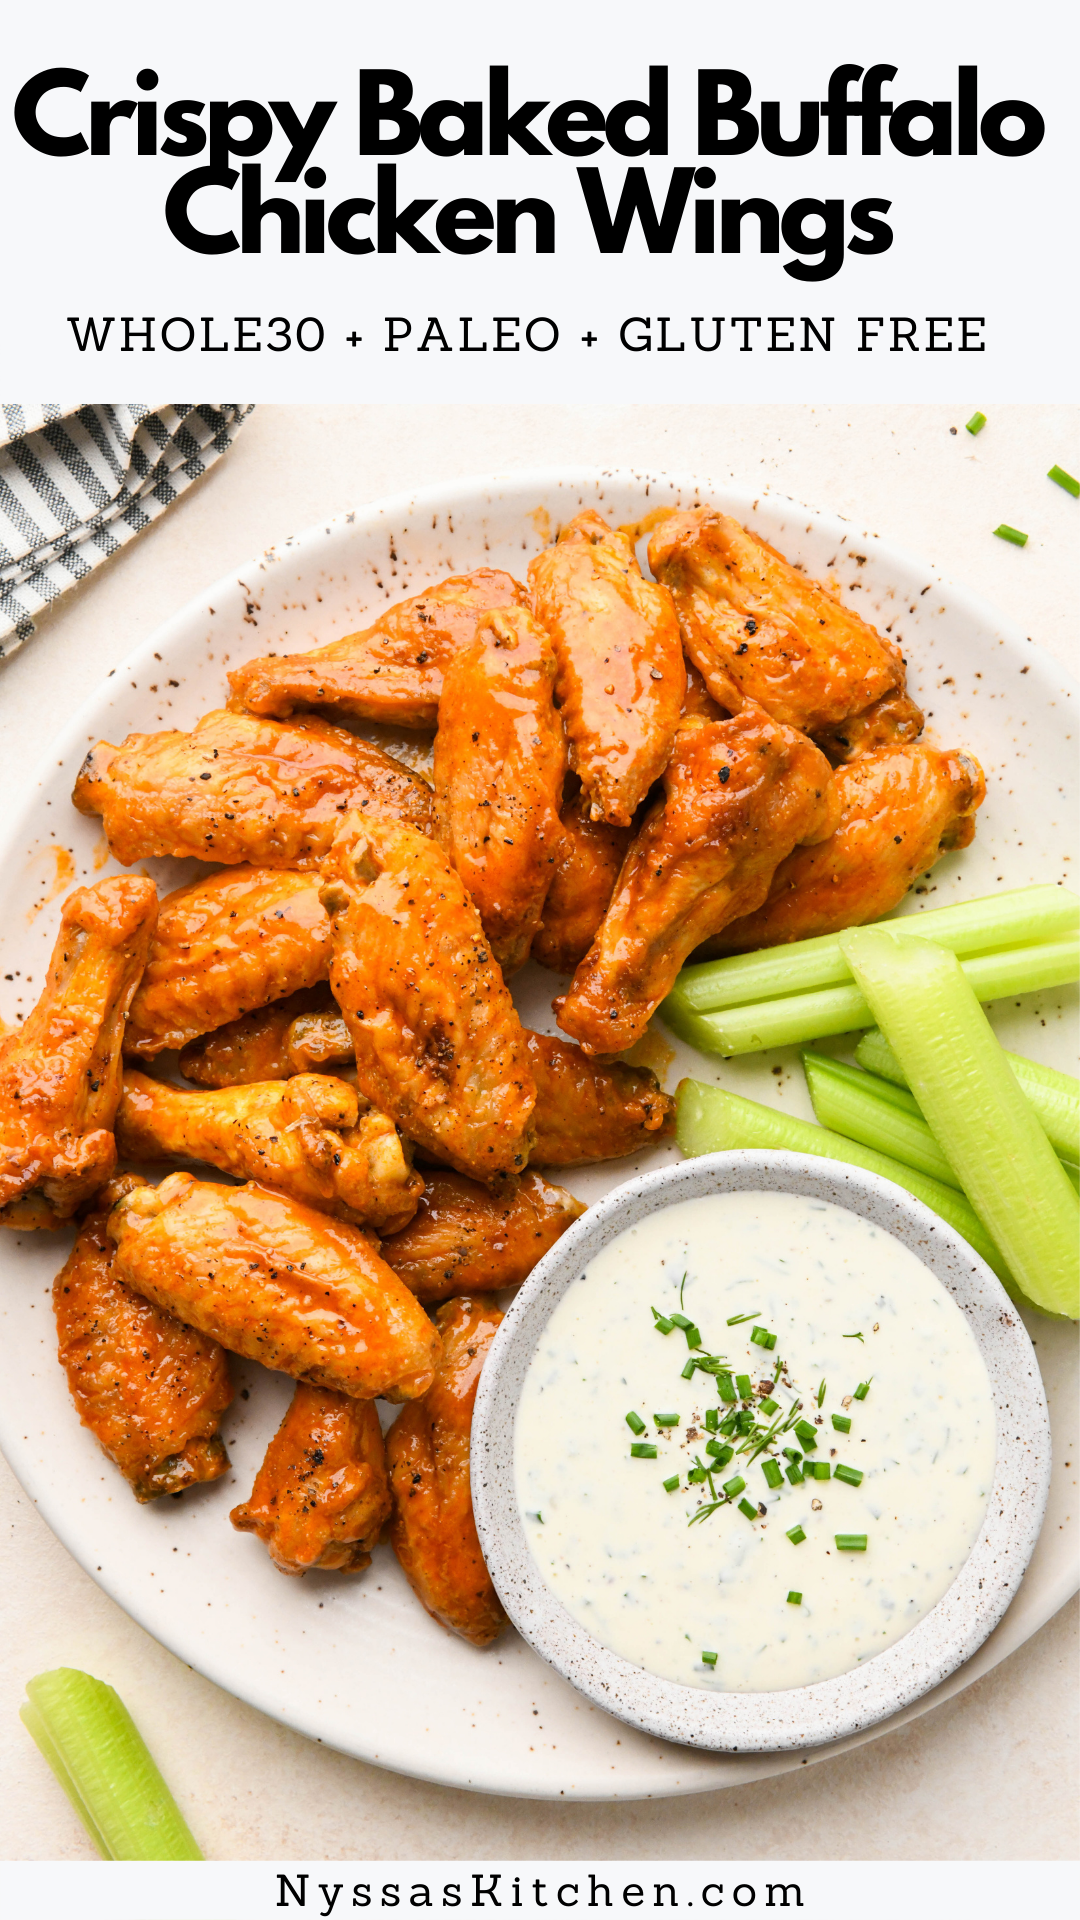 These crispy baked buffalo chicken wings are so easy to make and super delicious! Perfect for a party, game day, or main course at dinner. Baked in the oven (made without frying!) until crispy on the outside and tender on the inside, and tossed in a zippy, hot buffalo sauce. So good dipped in creamy ranch dressing! Whole30 compatible, paleo friendly, gluten free, and keto / low carb.